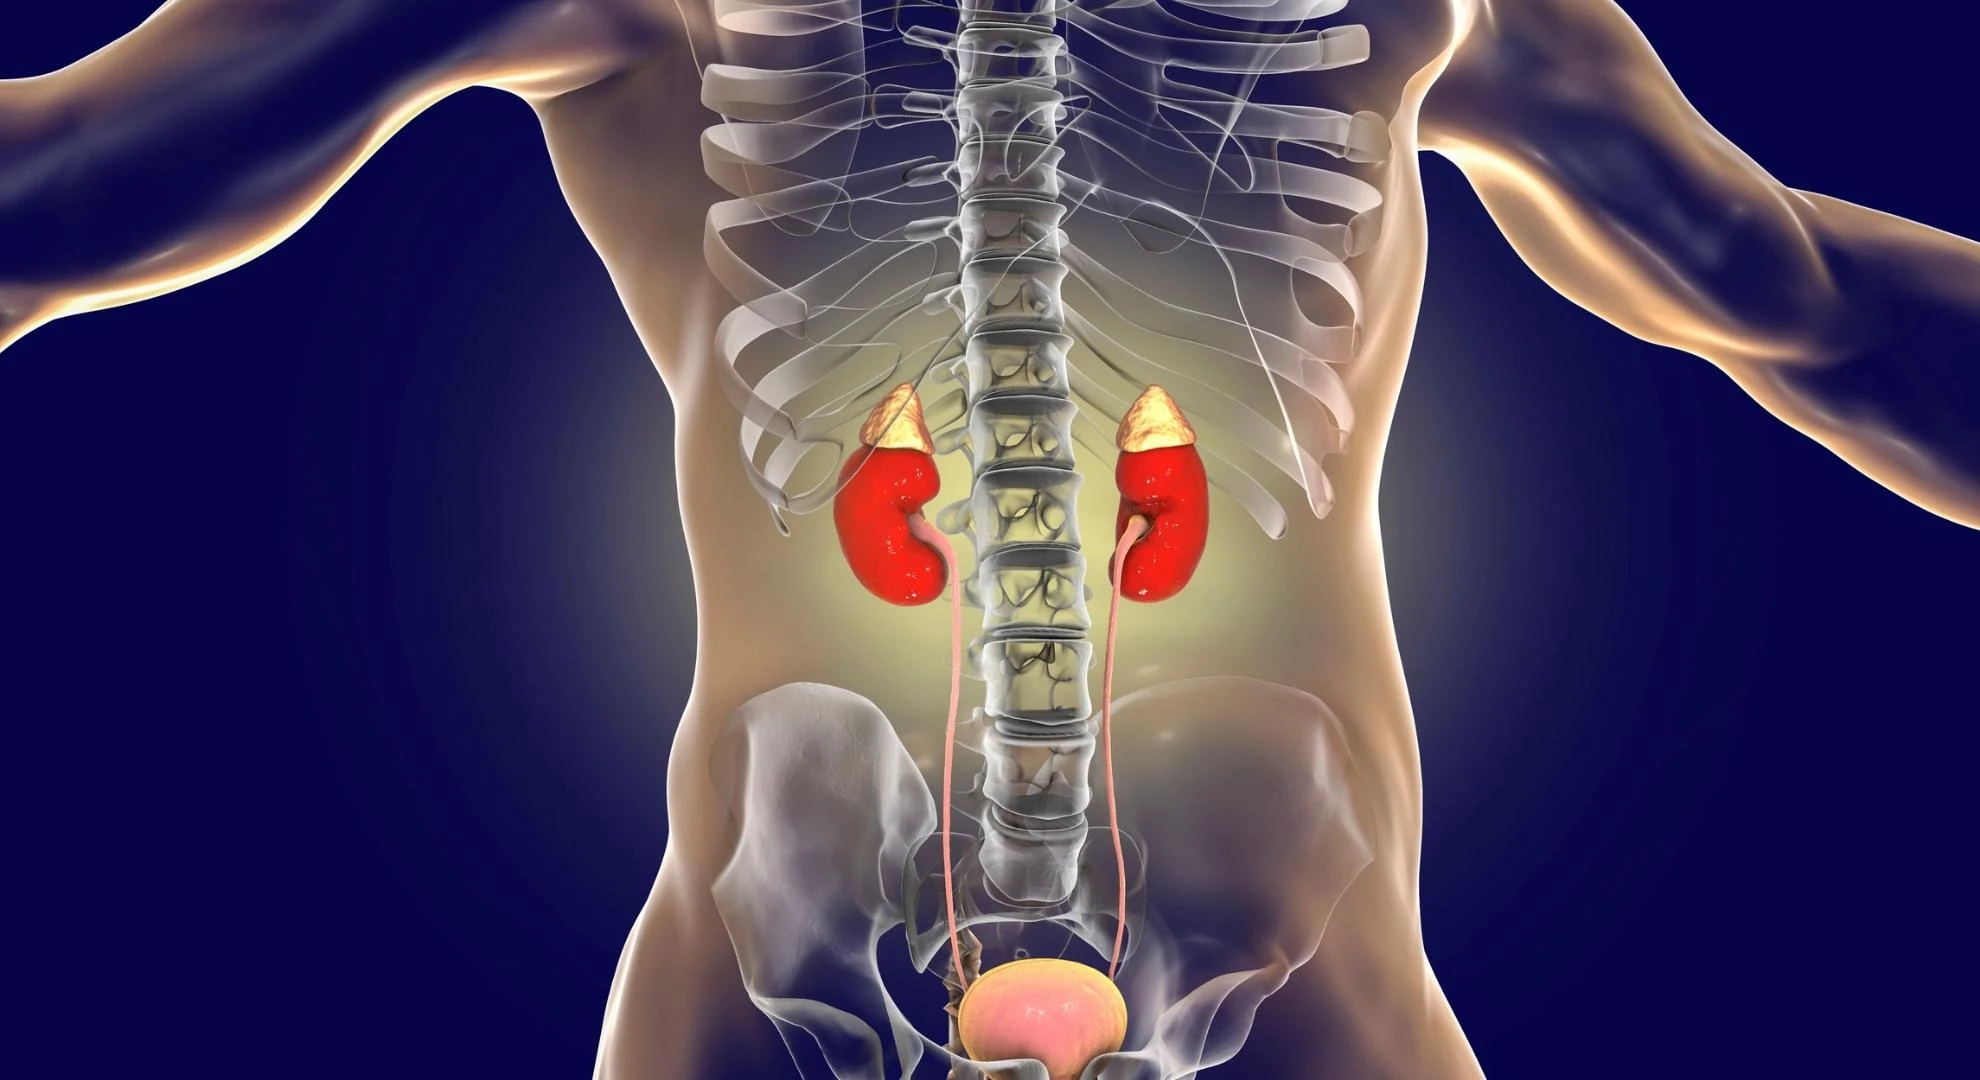 What Are Adrenal Diseases?